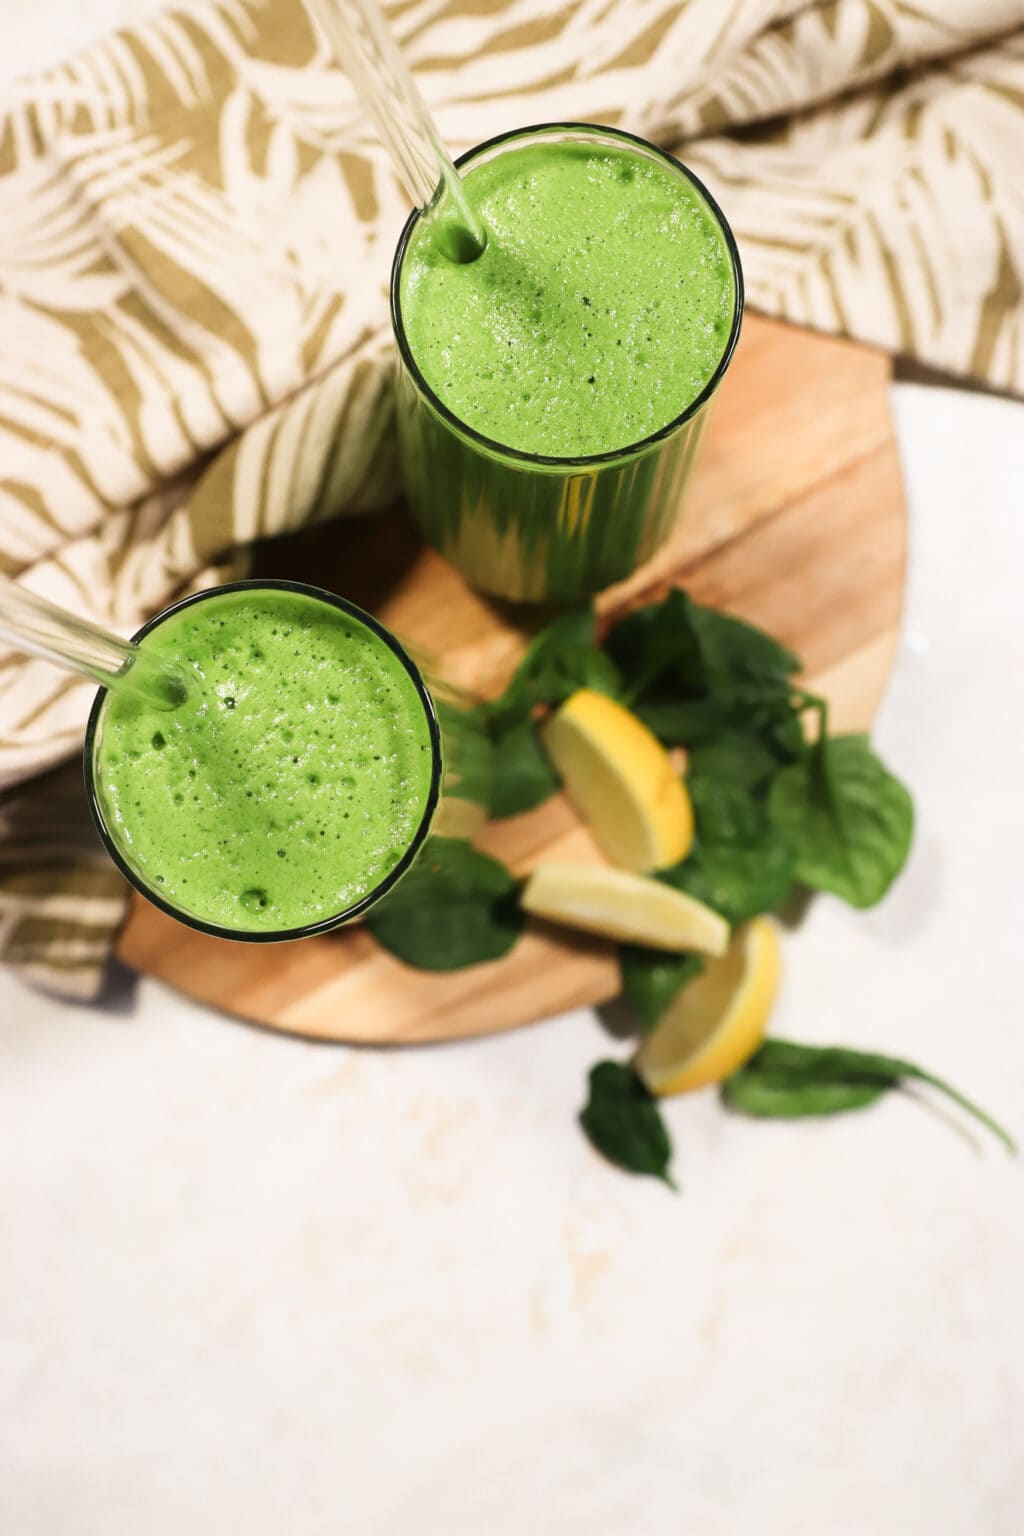 Two glasses filled with Blender Juice With Spinach, Pineapple & Cucumber, on a wood cutting board with lemon slices and spinach leaves on the side.